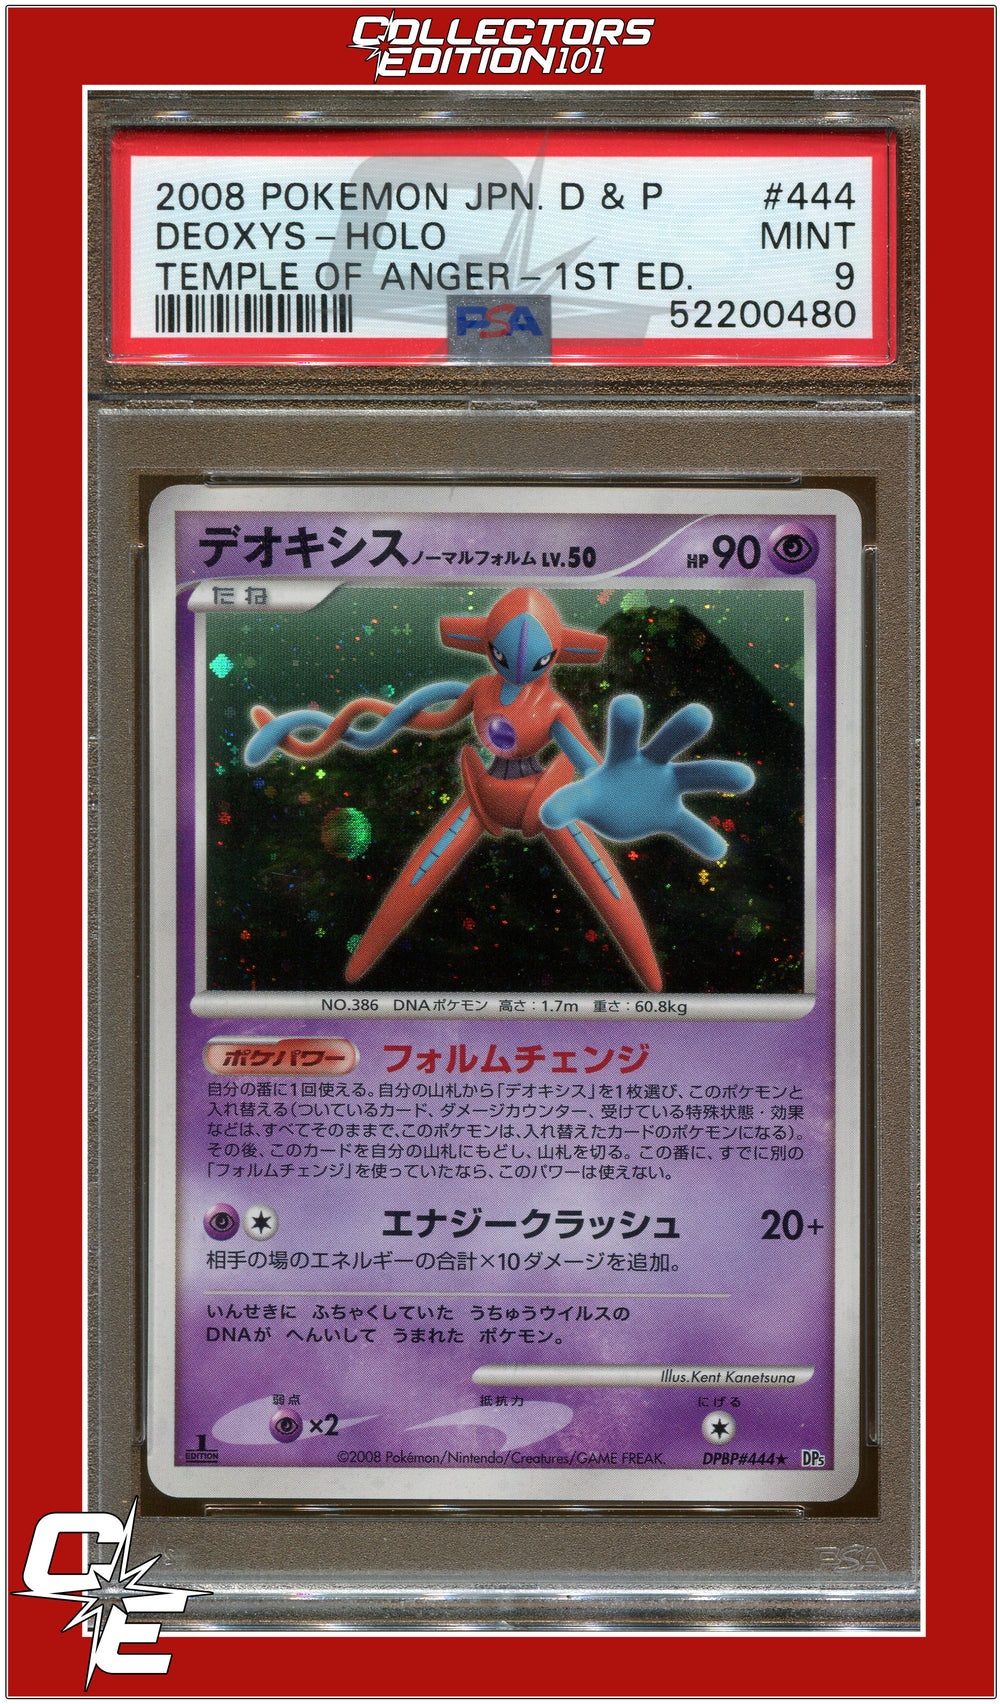 Japanese Temple of Anger 444 Deoxys 1st Edition Holo PSA 9